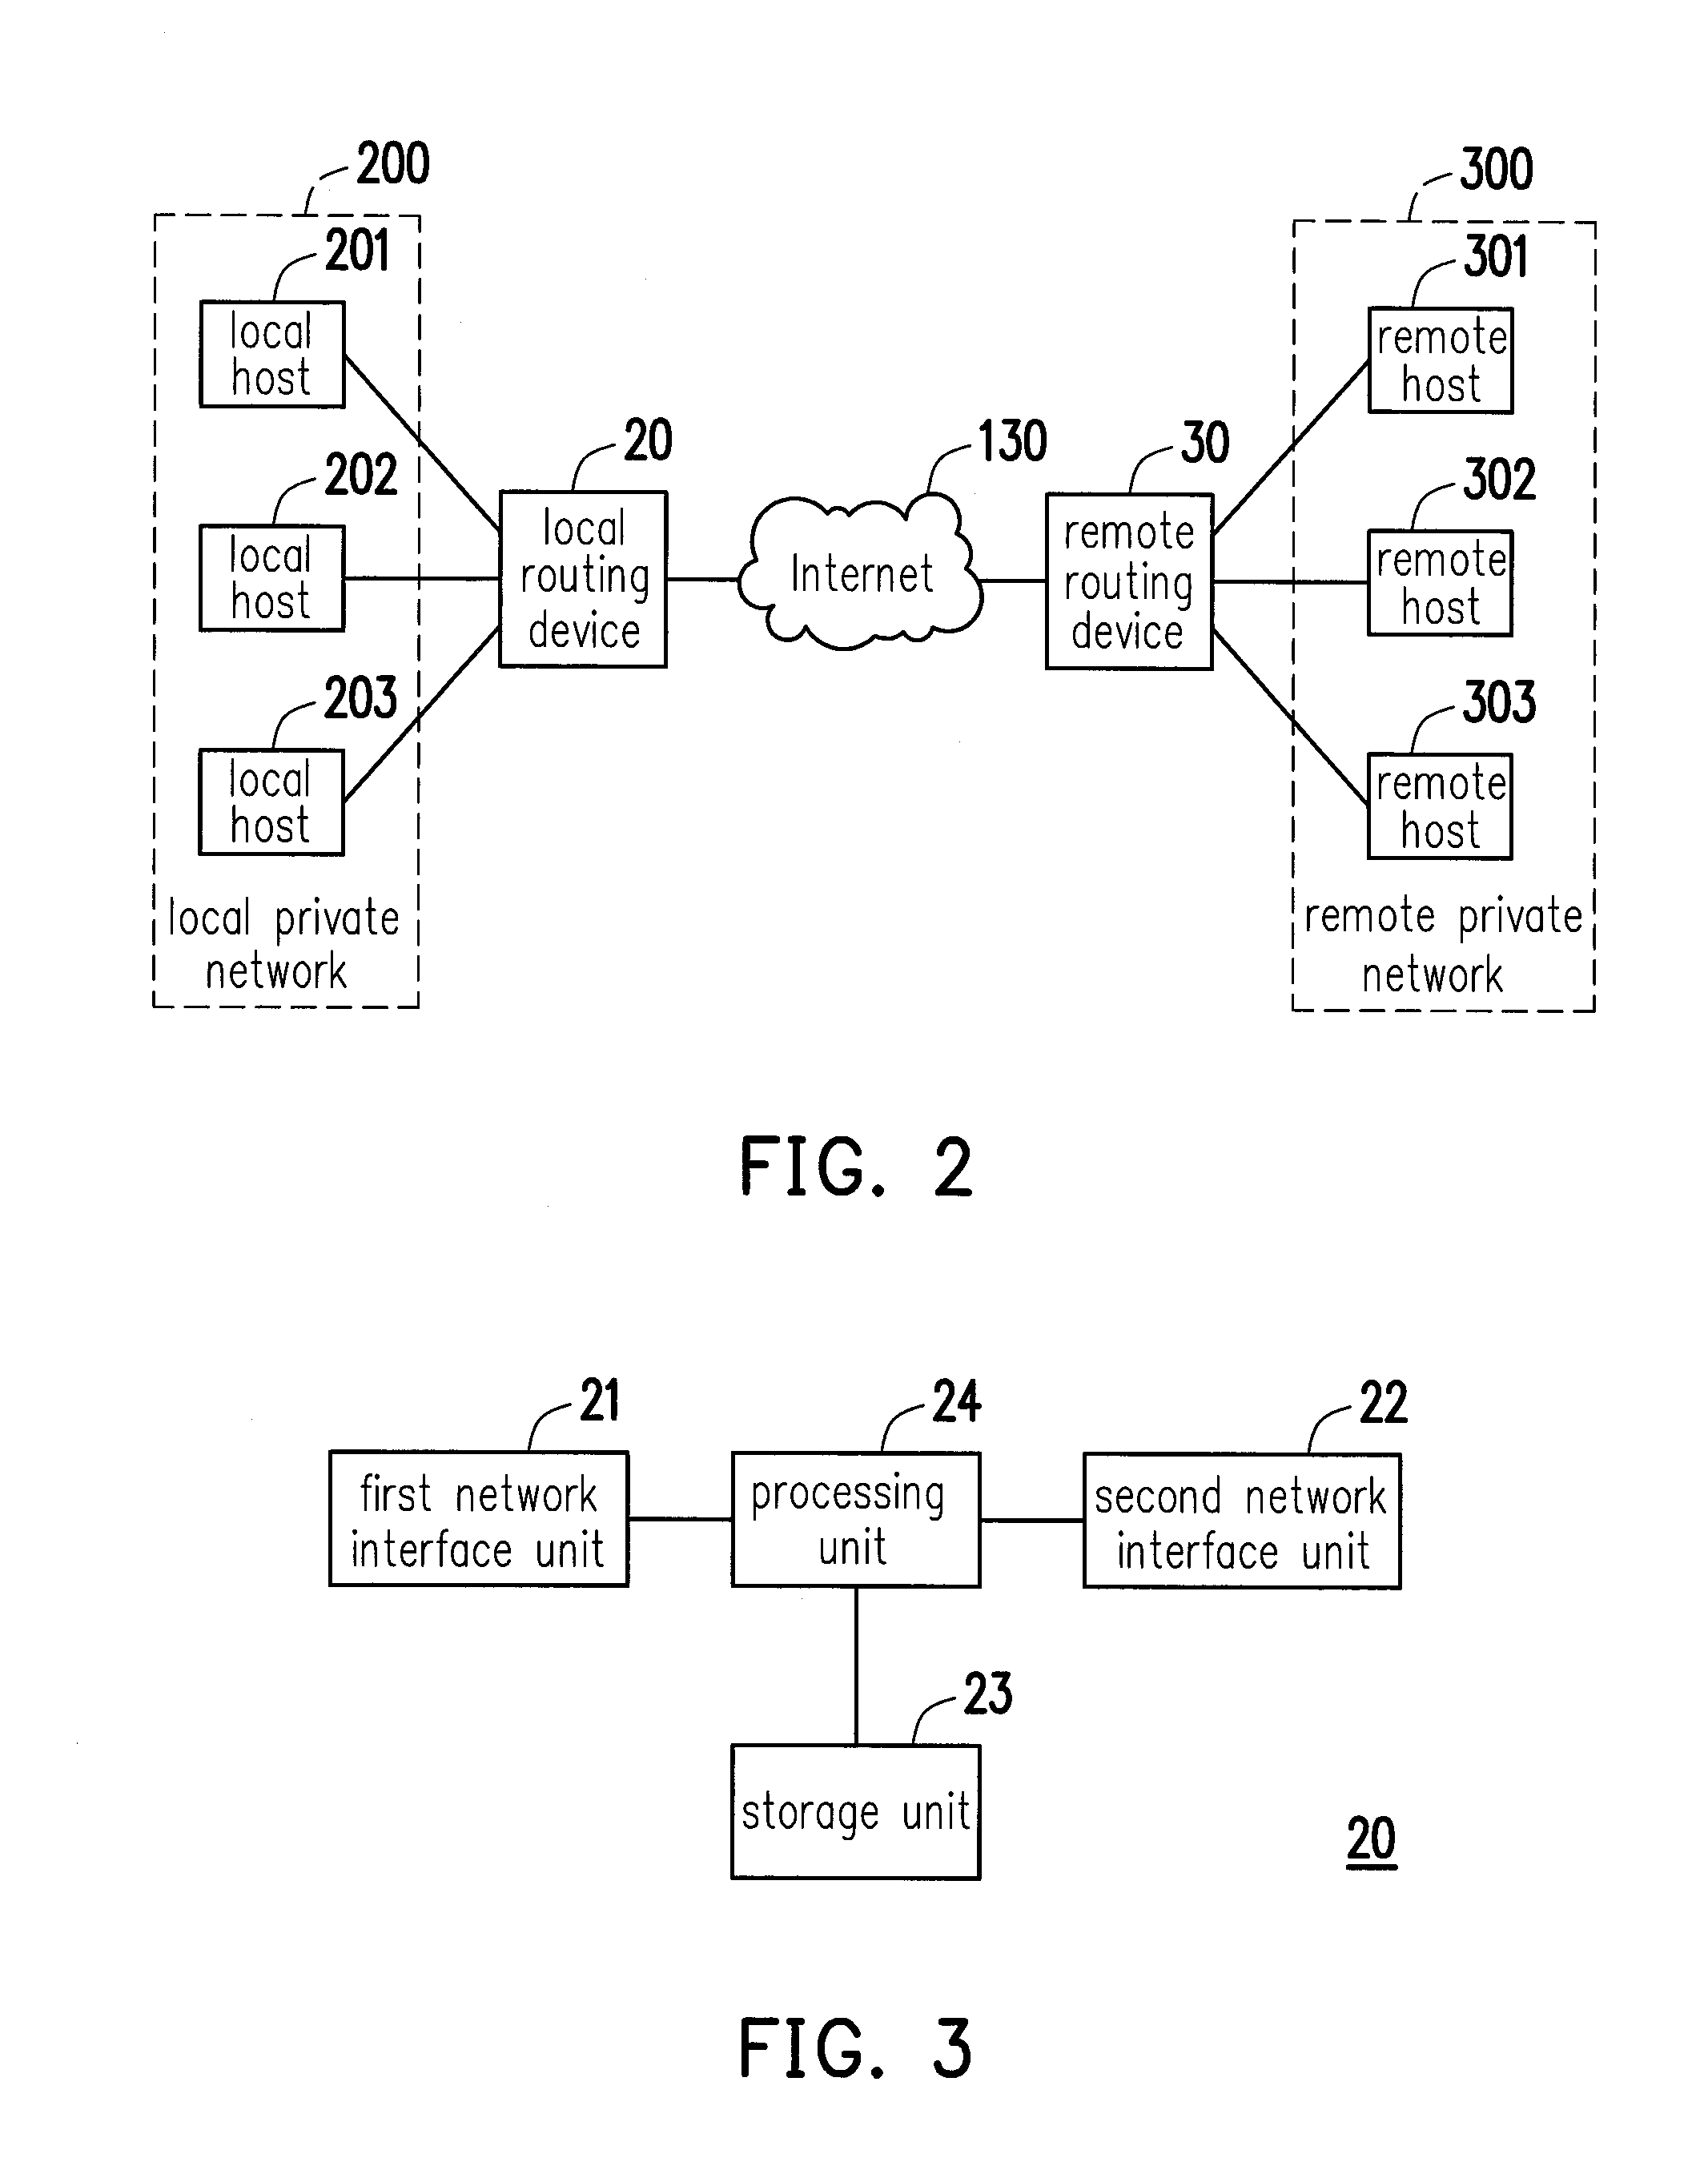 Routing device